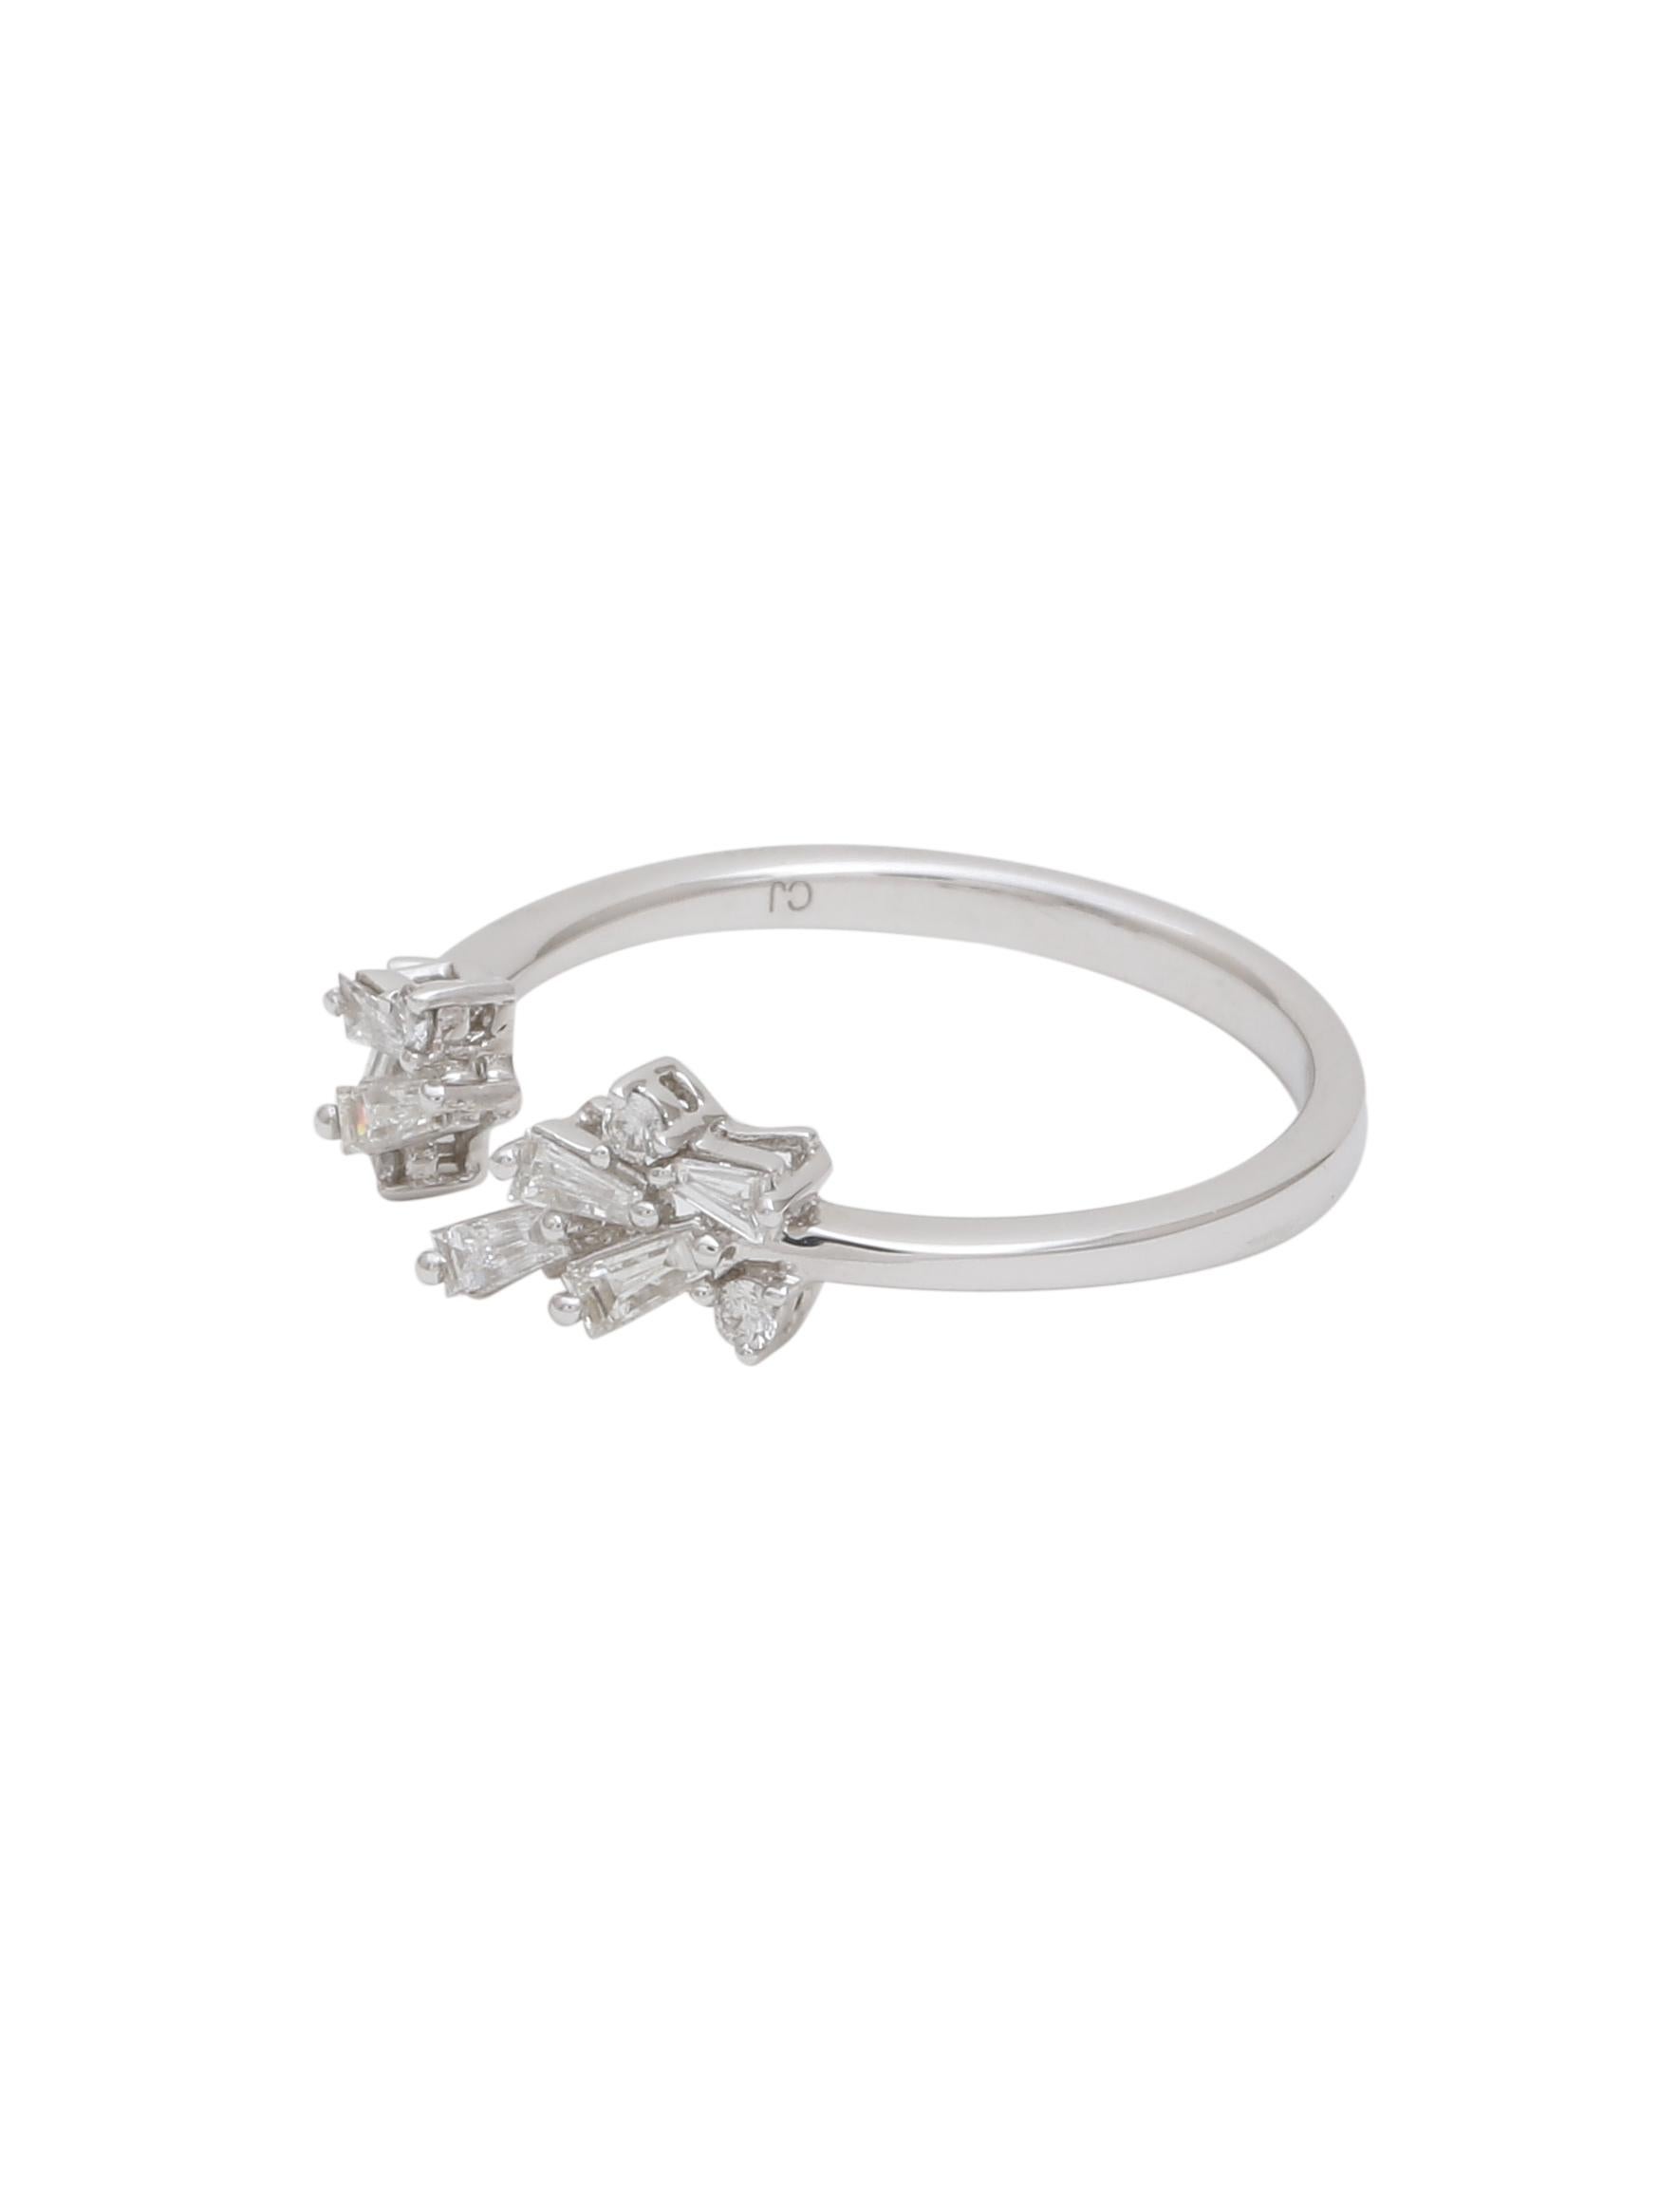 A pretty petit Diamond ring with small Diamond baguettes and Diamond Rounds are set together with a gap in the middle. A very modern and light weight design which is dressy yet good for everyday wear. 
The Diamond baguettes in the ring weigh 0.21